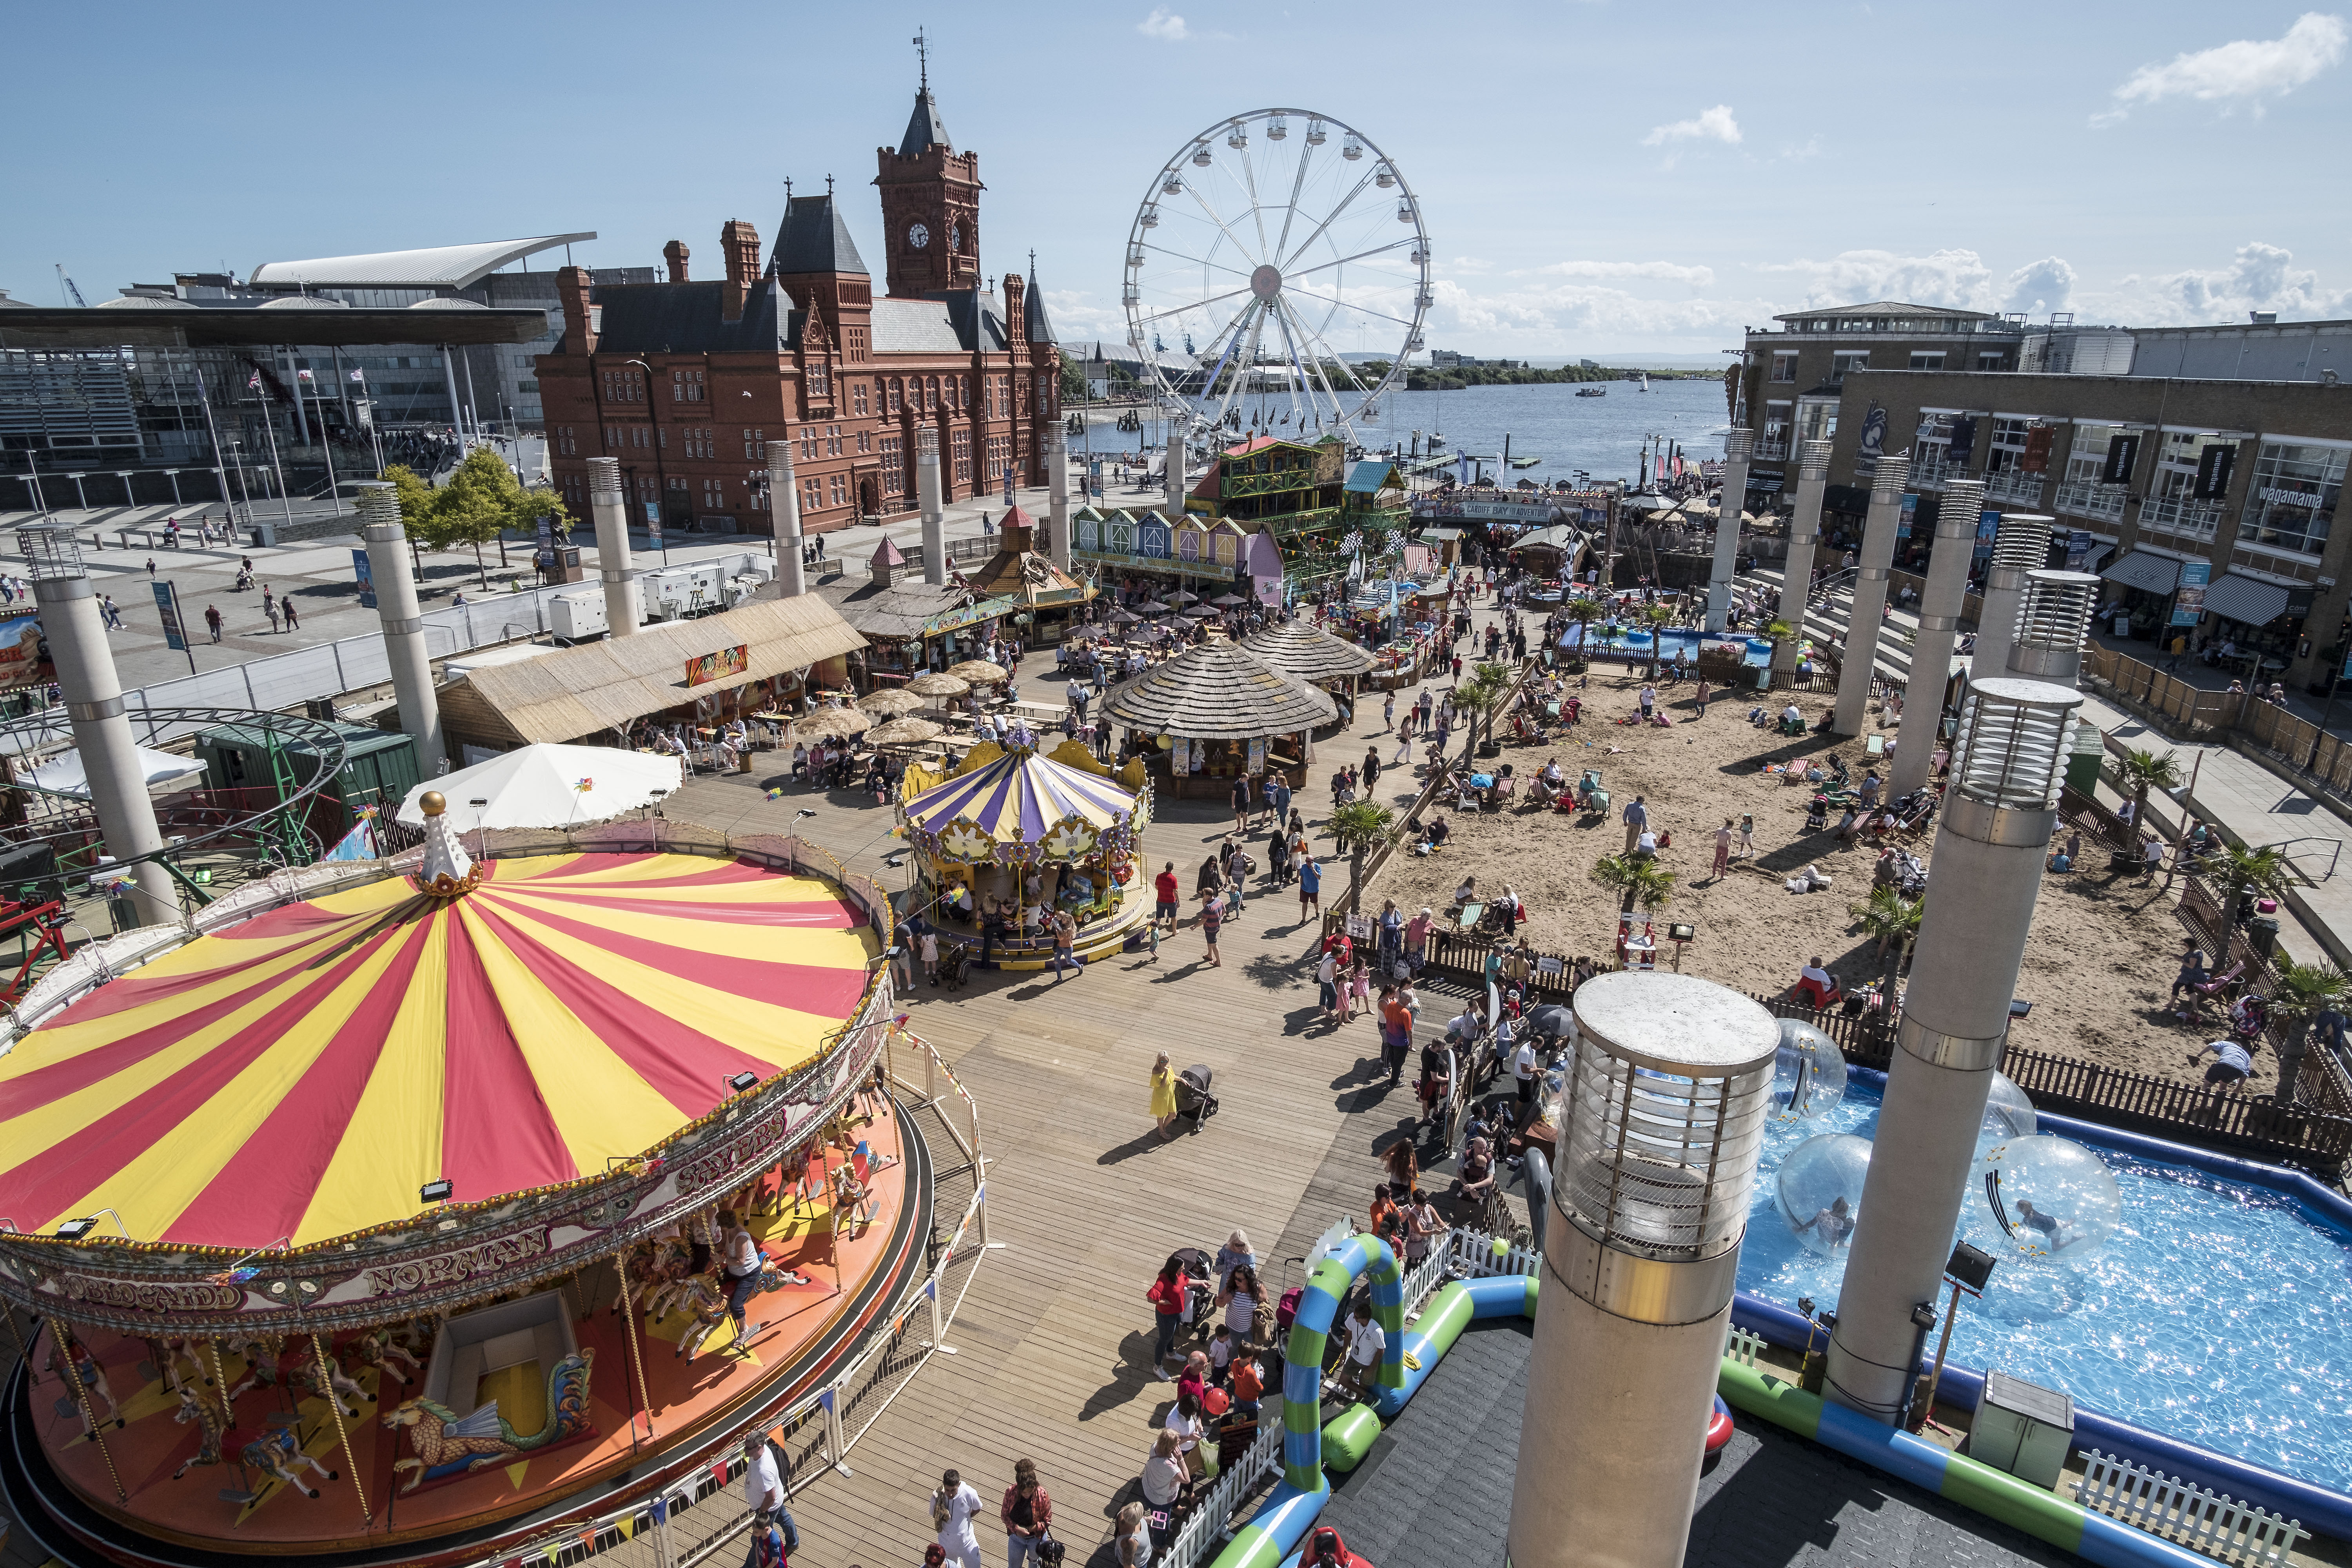 Capital FM Cardiff Bay beach to become a bigger theme park in 2018! -  Cardiff Times